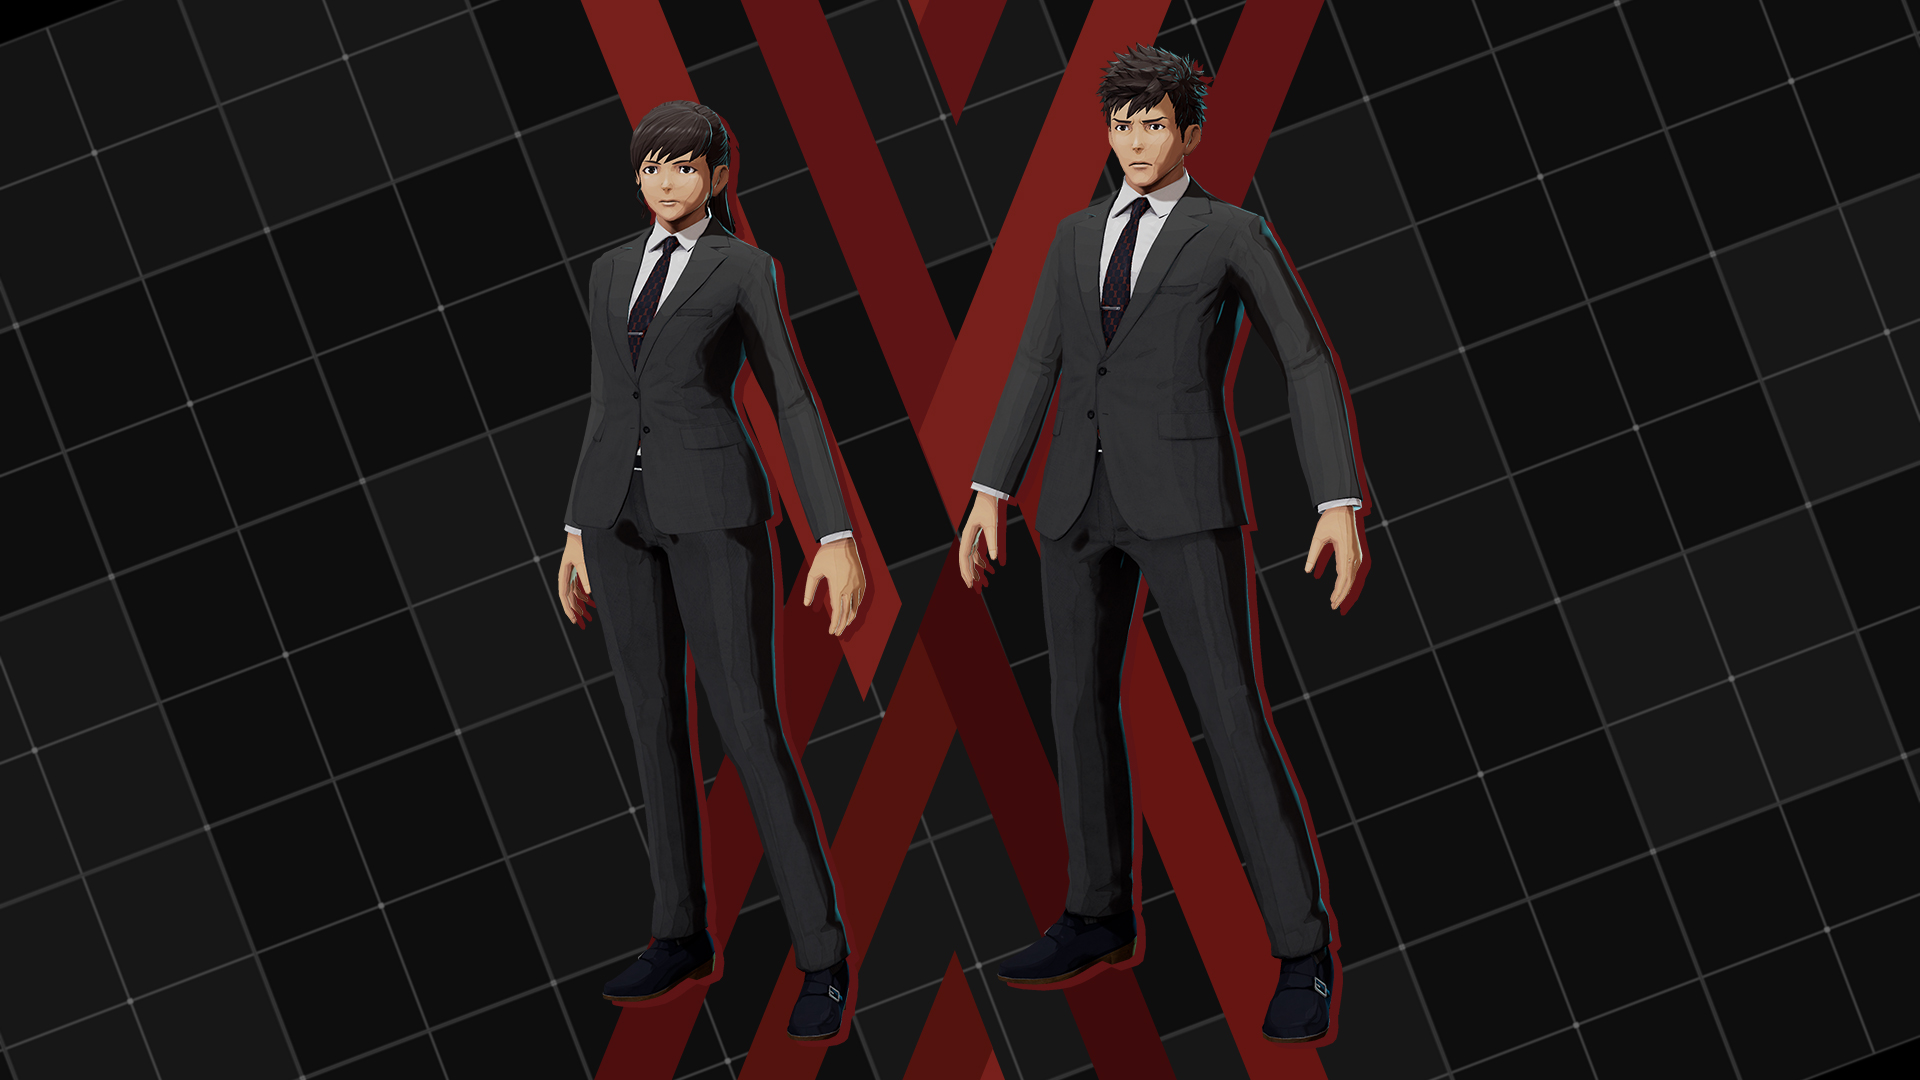 Outer Suit "Formal Attire"